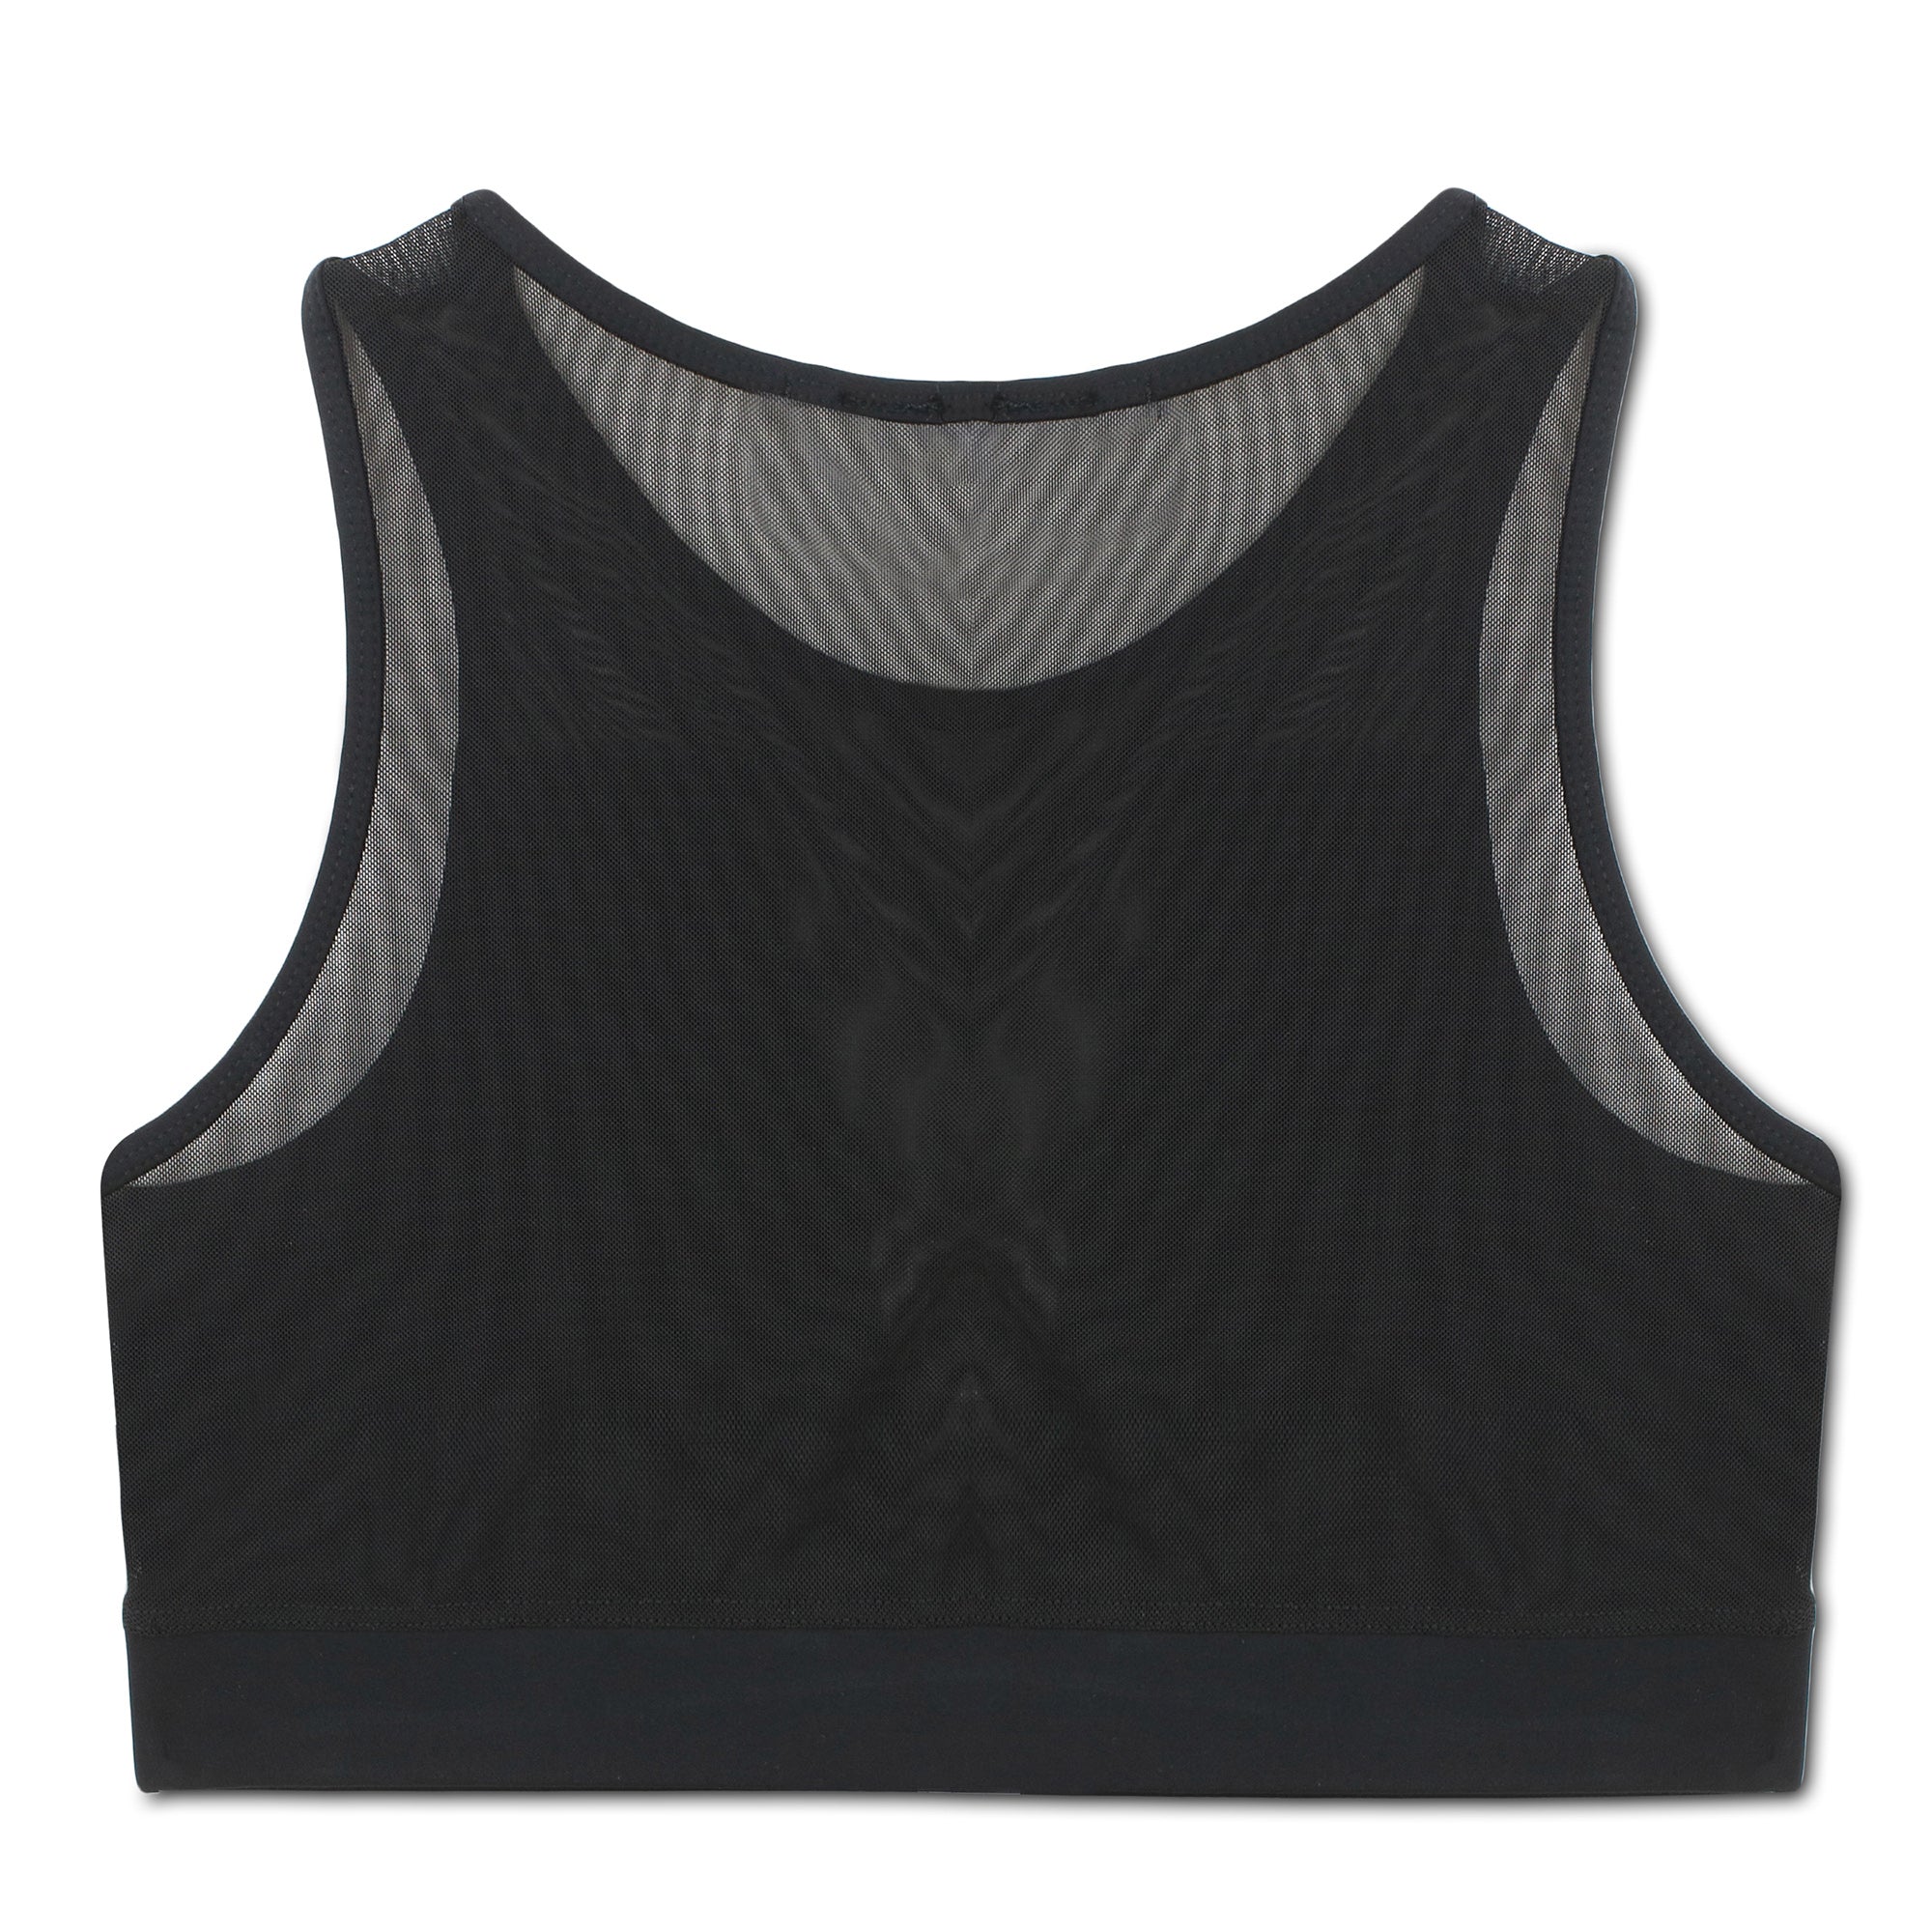 ***ELITE COLLECTION** Black Sports Bra styled with a V-Shaped Mesh Panel